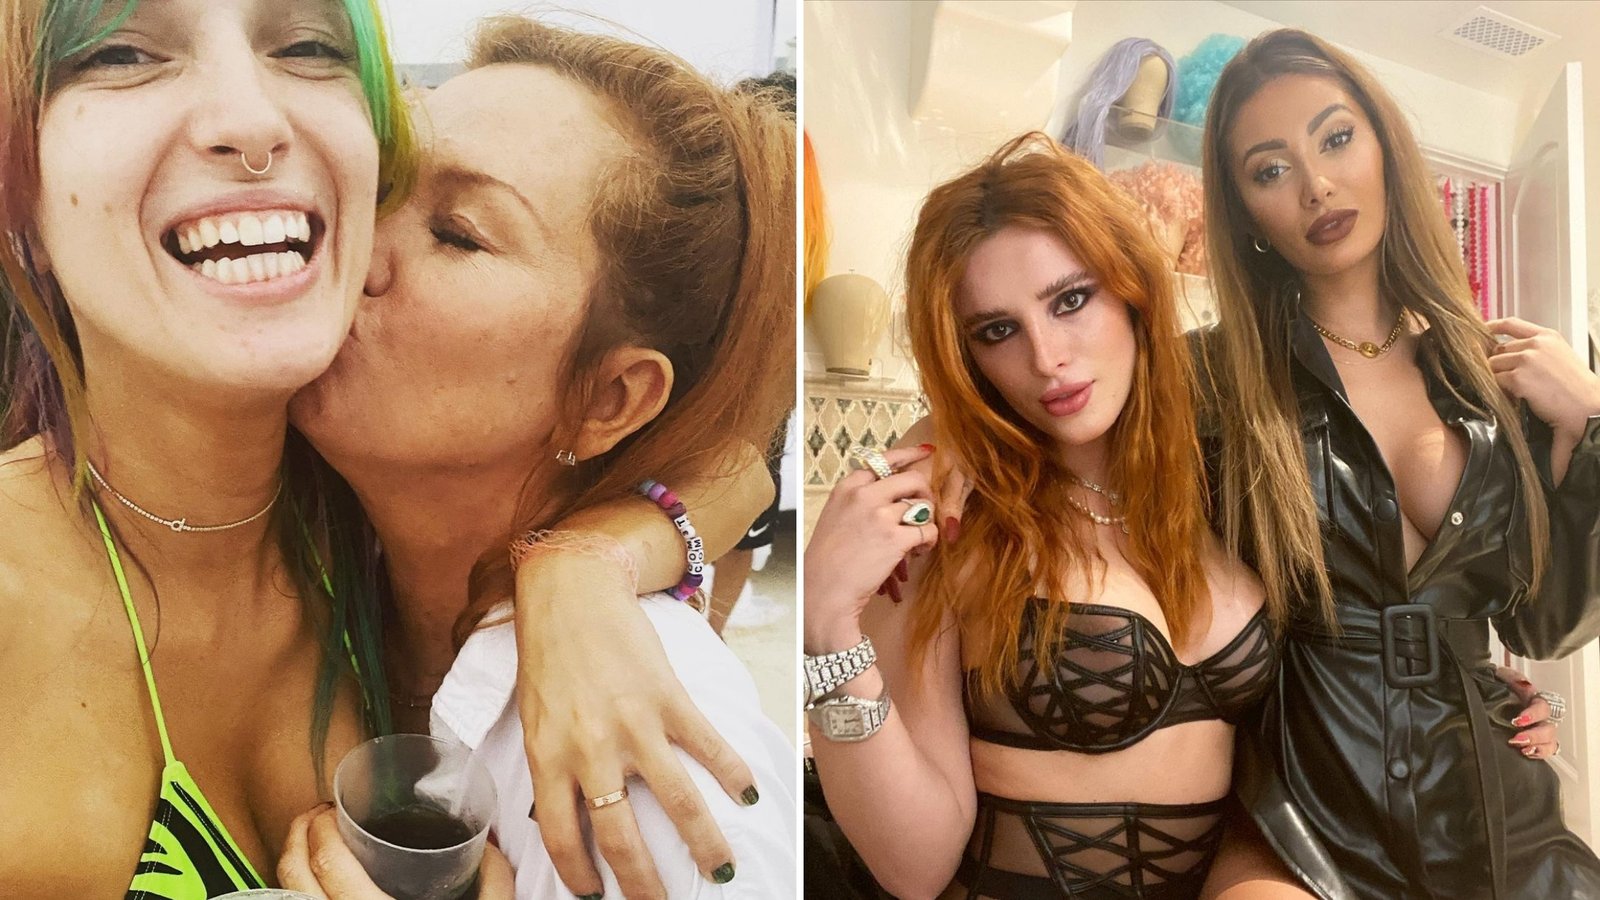 Bella Thorne Is Pansexual, and She Had Sex With Men and Women - Shocking